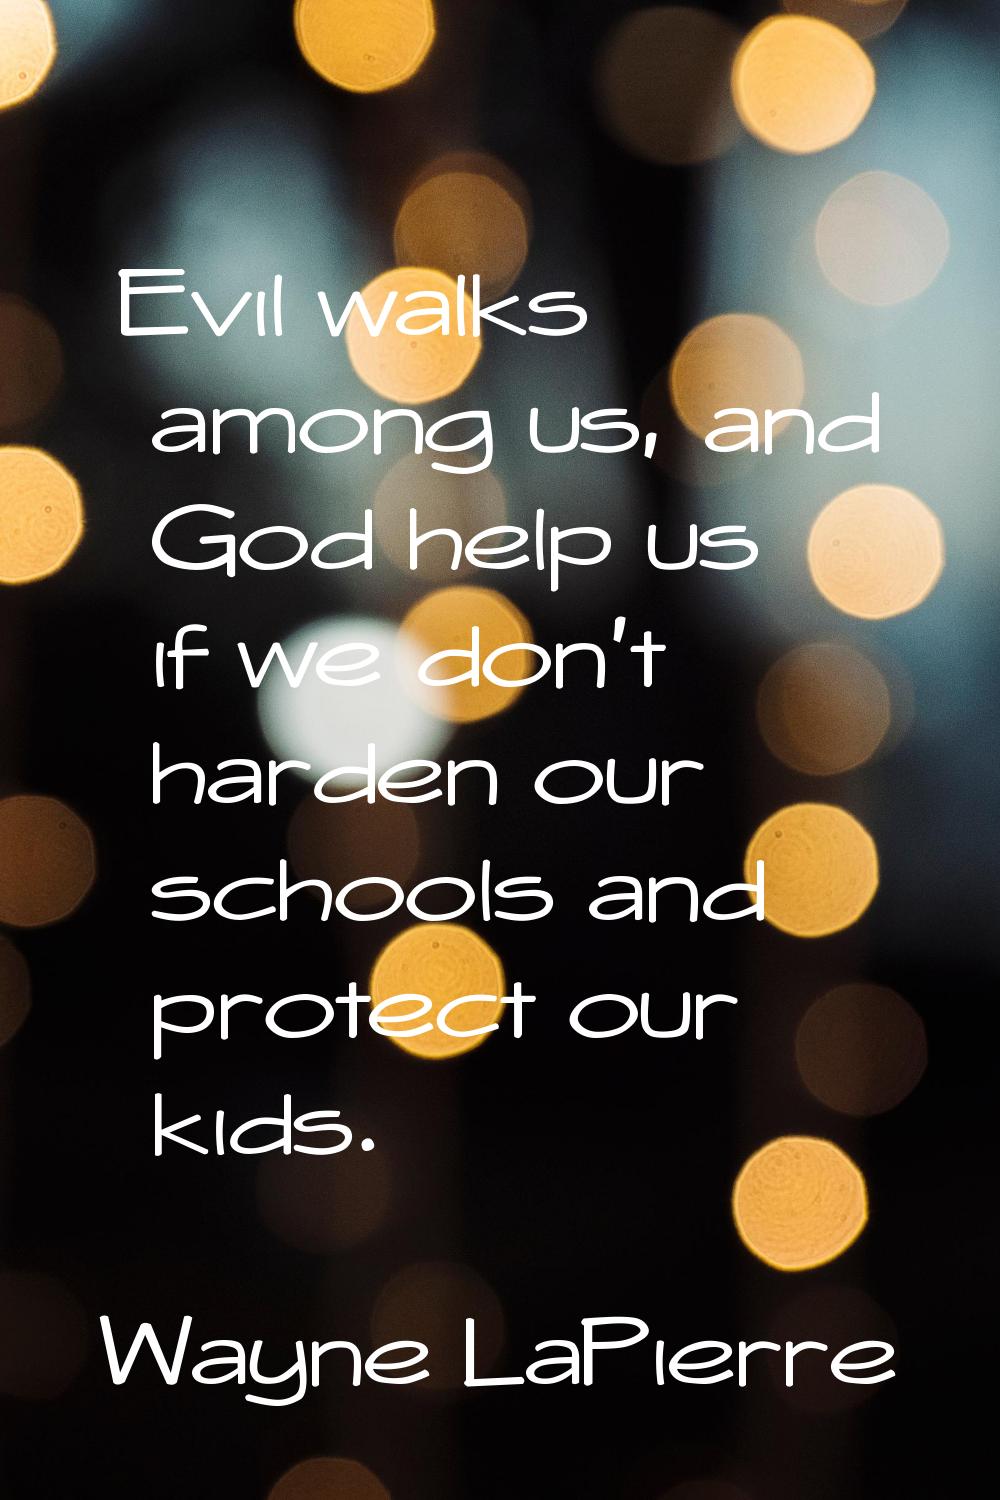 Evil walks among us, and God help us if we don't harden our schools and protect our kids.